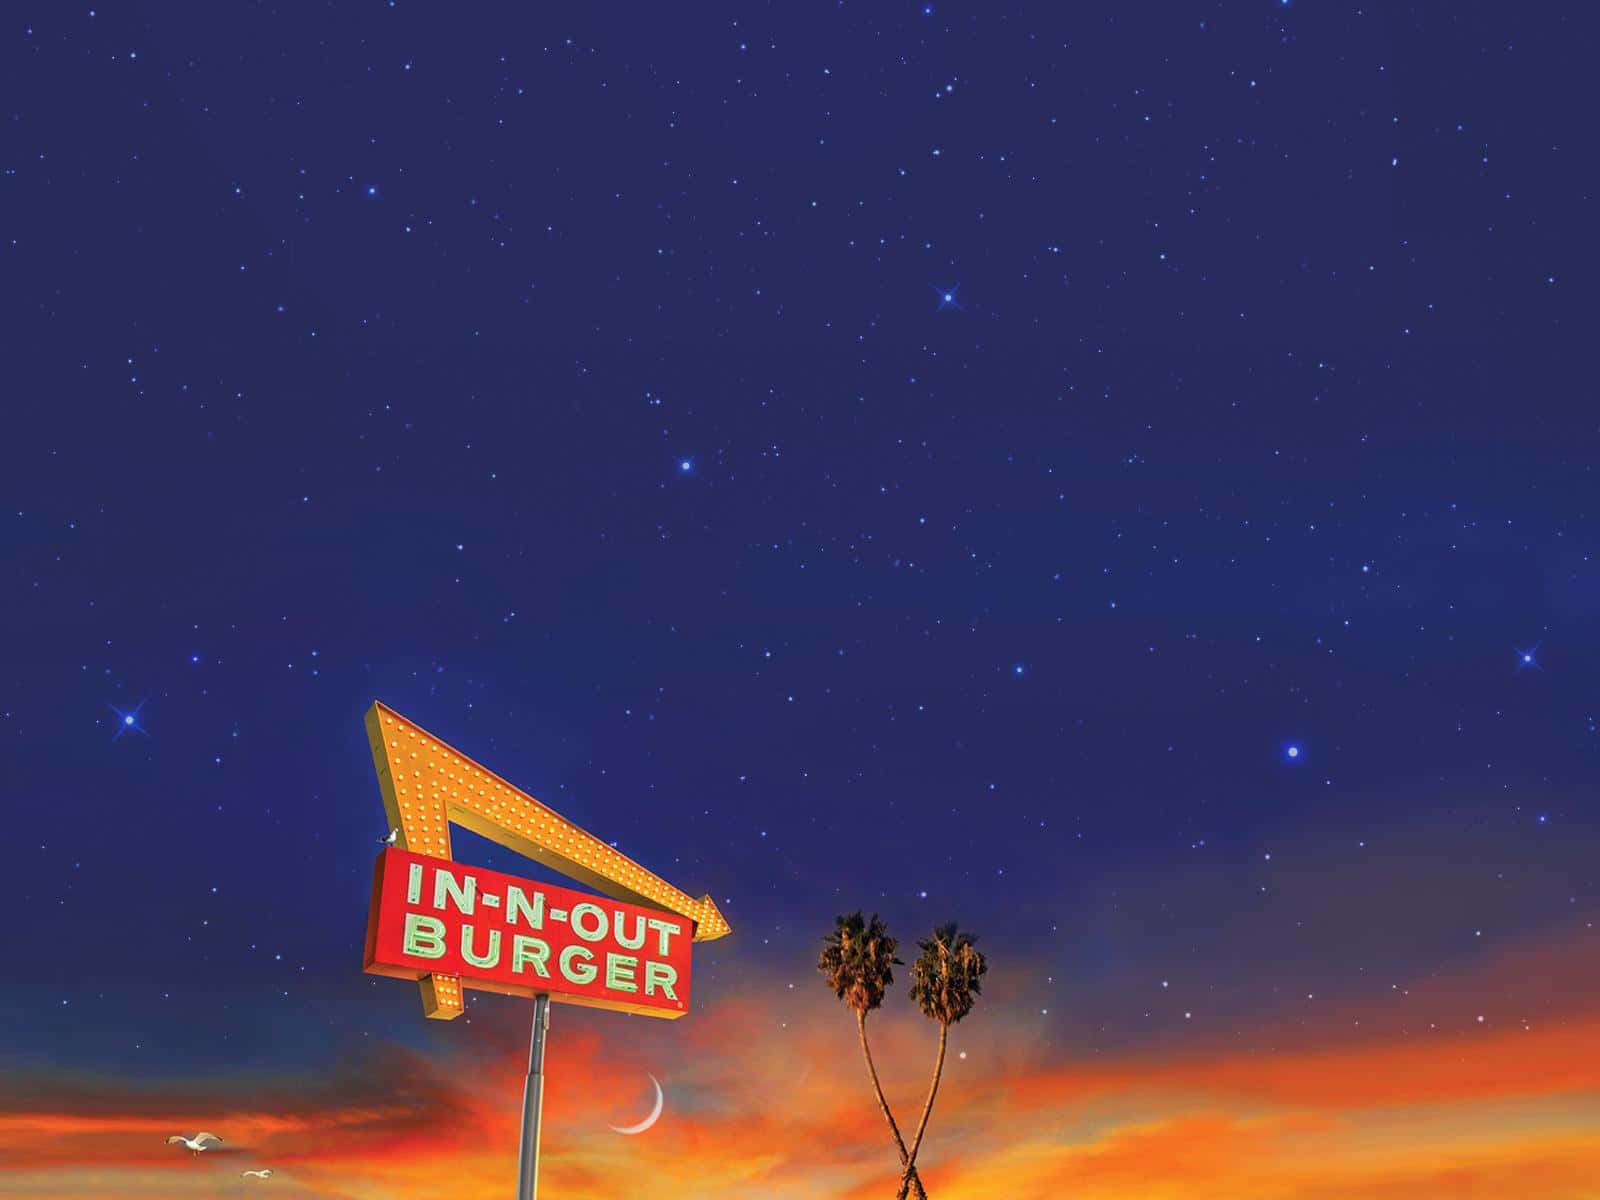 I N Out 1600 X 1200 Wallpaper